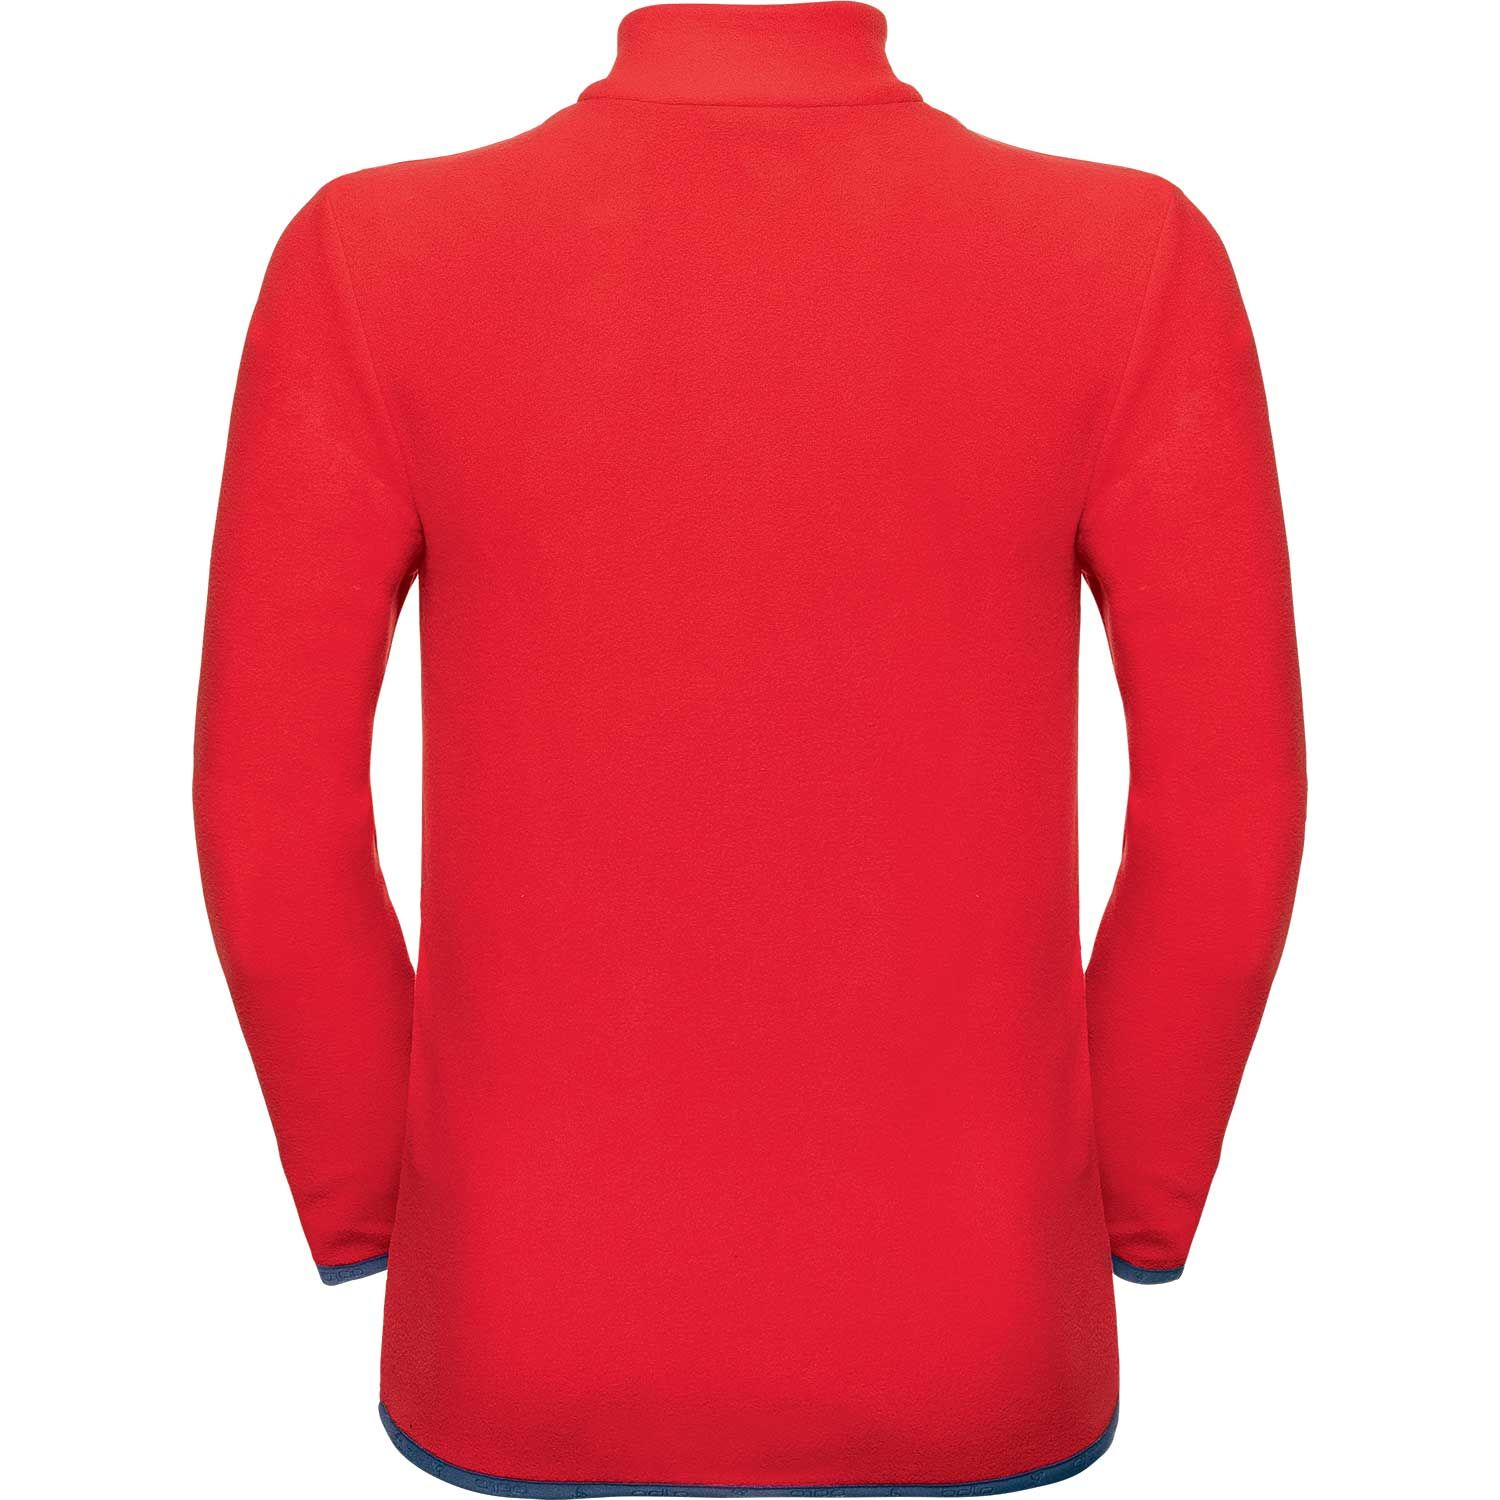 Polaire Enfant 1/2 zip Royale Kids - Fiery Red